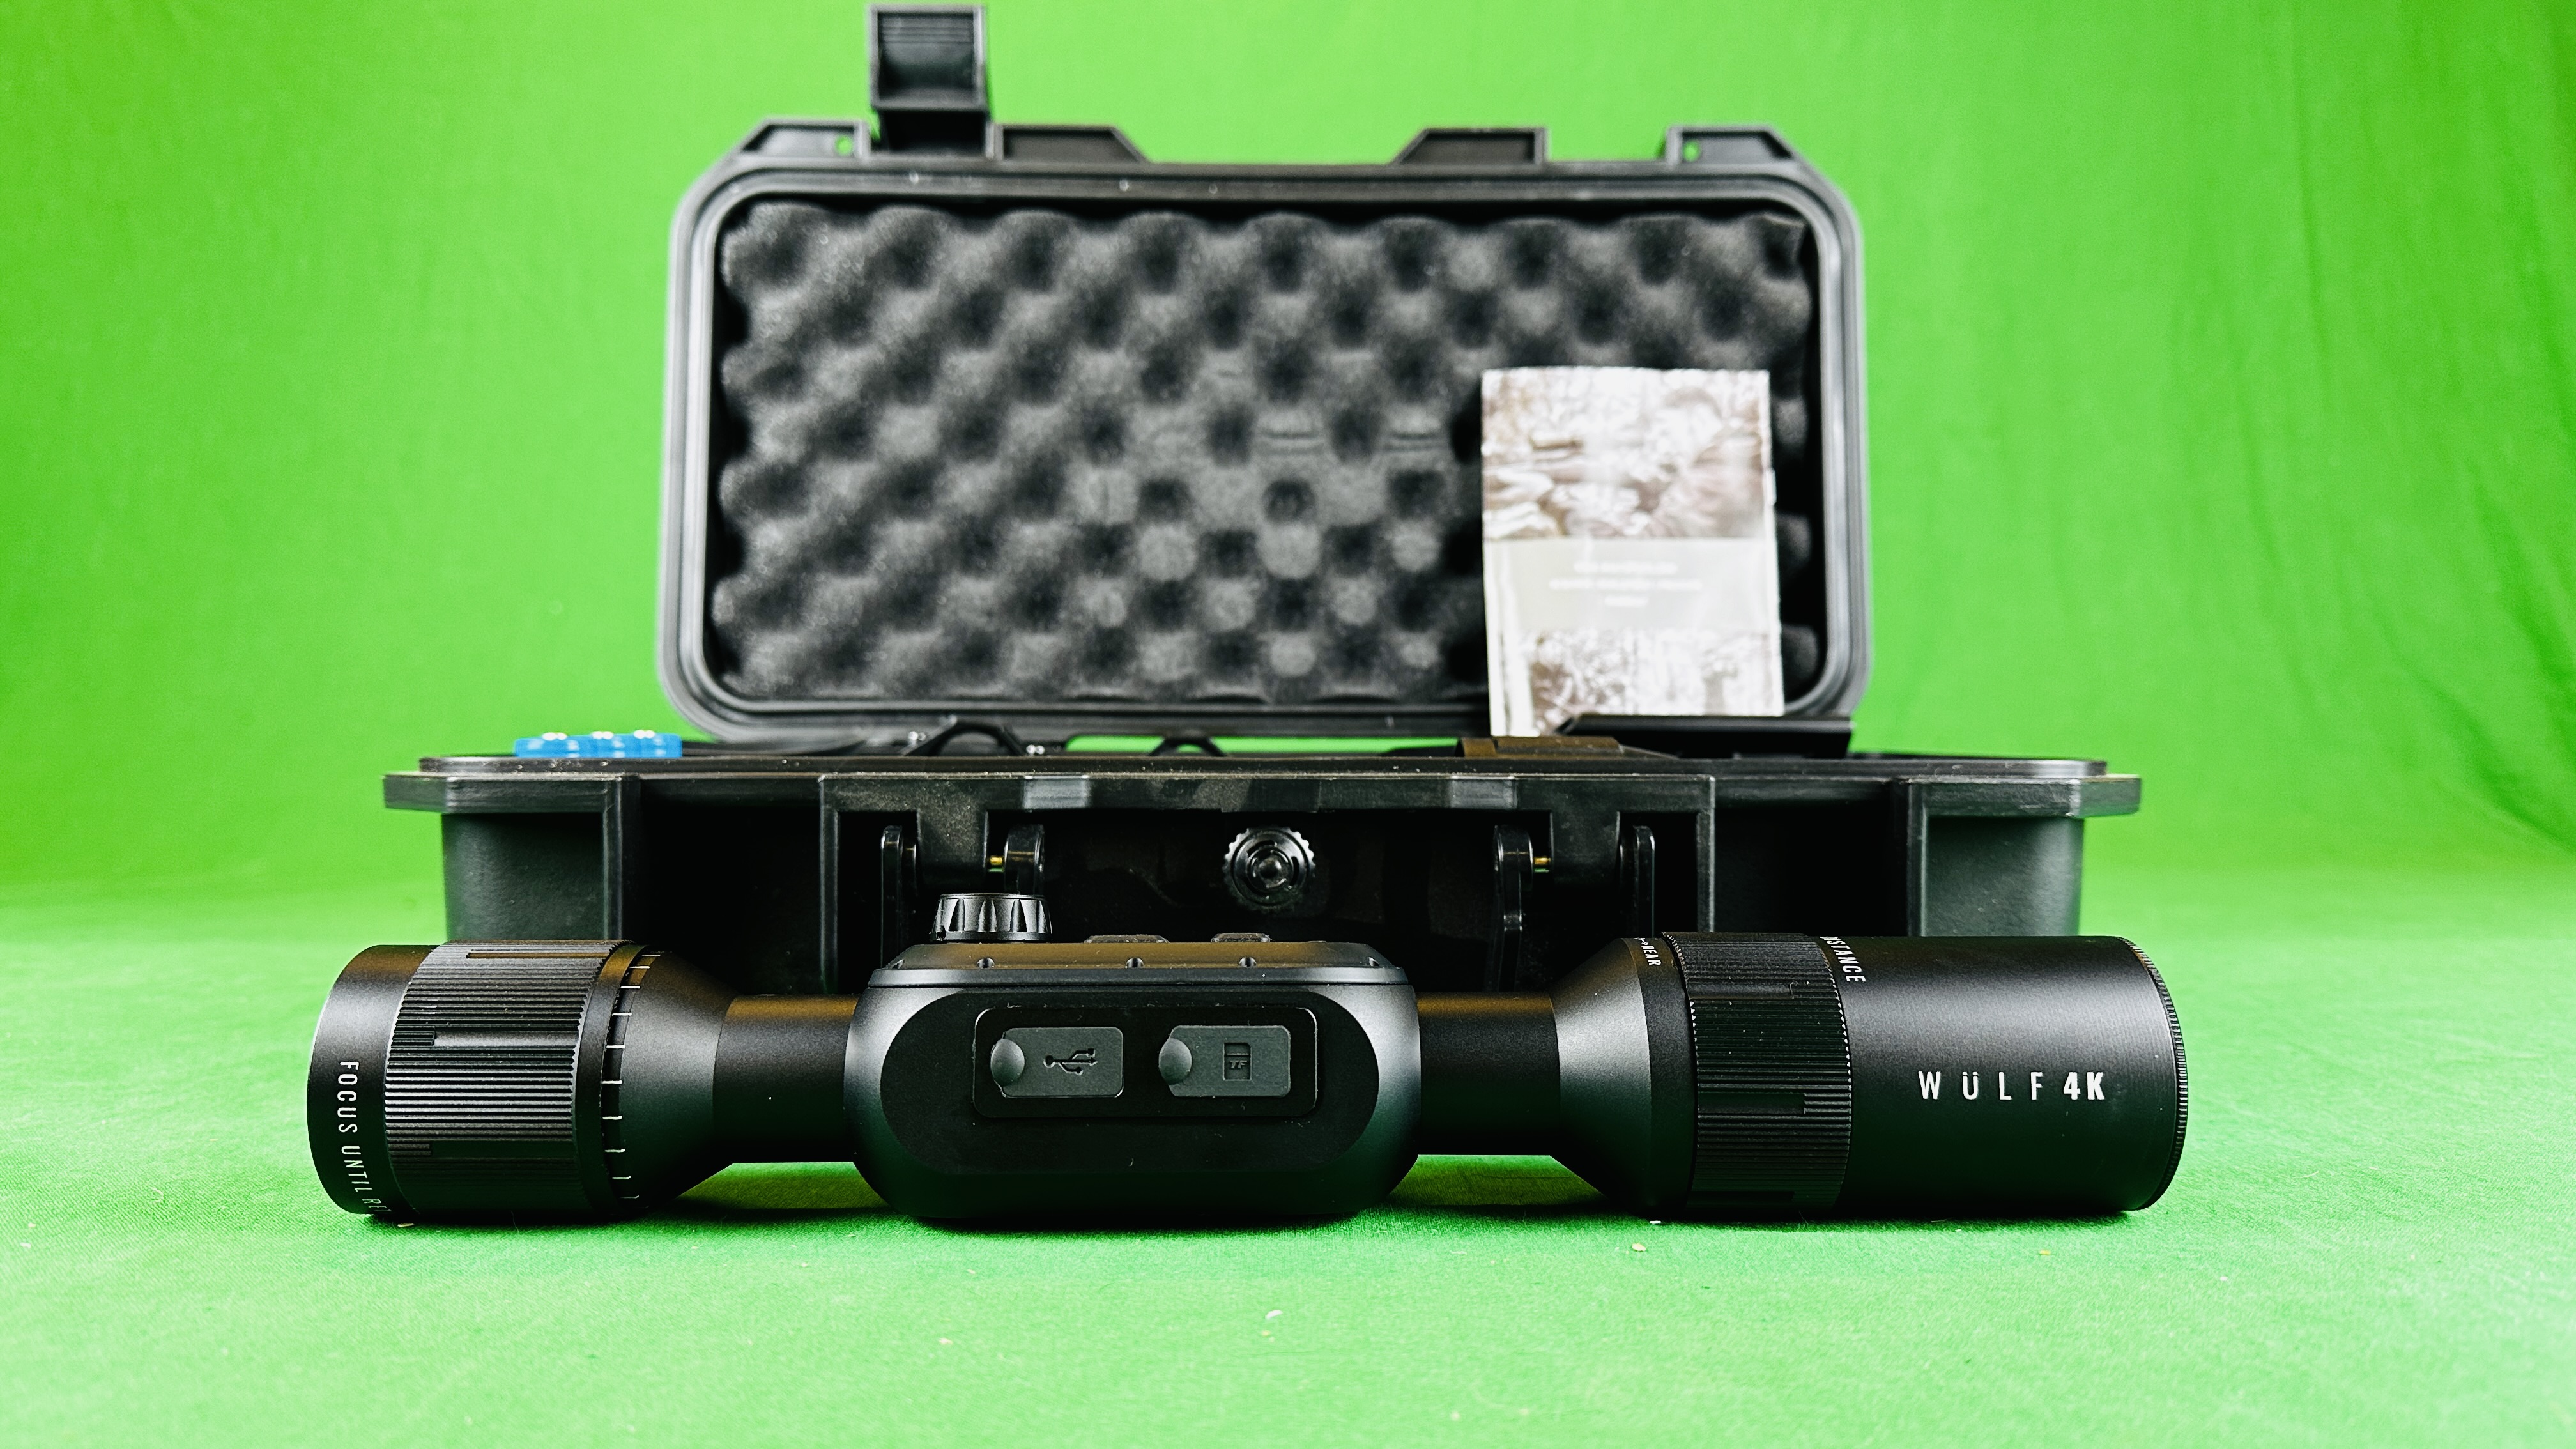 WULF 3-24X DAY/NIGHT VISION RIFLE SCOPE IN HARD SHELL CARRY CASE WITH ACCESSORIES.